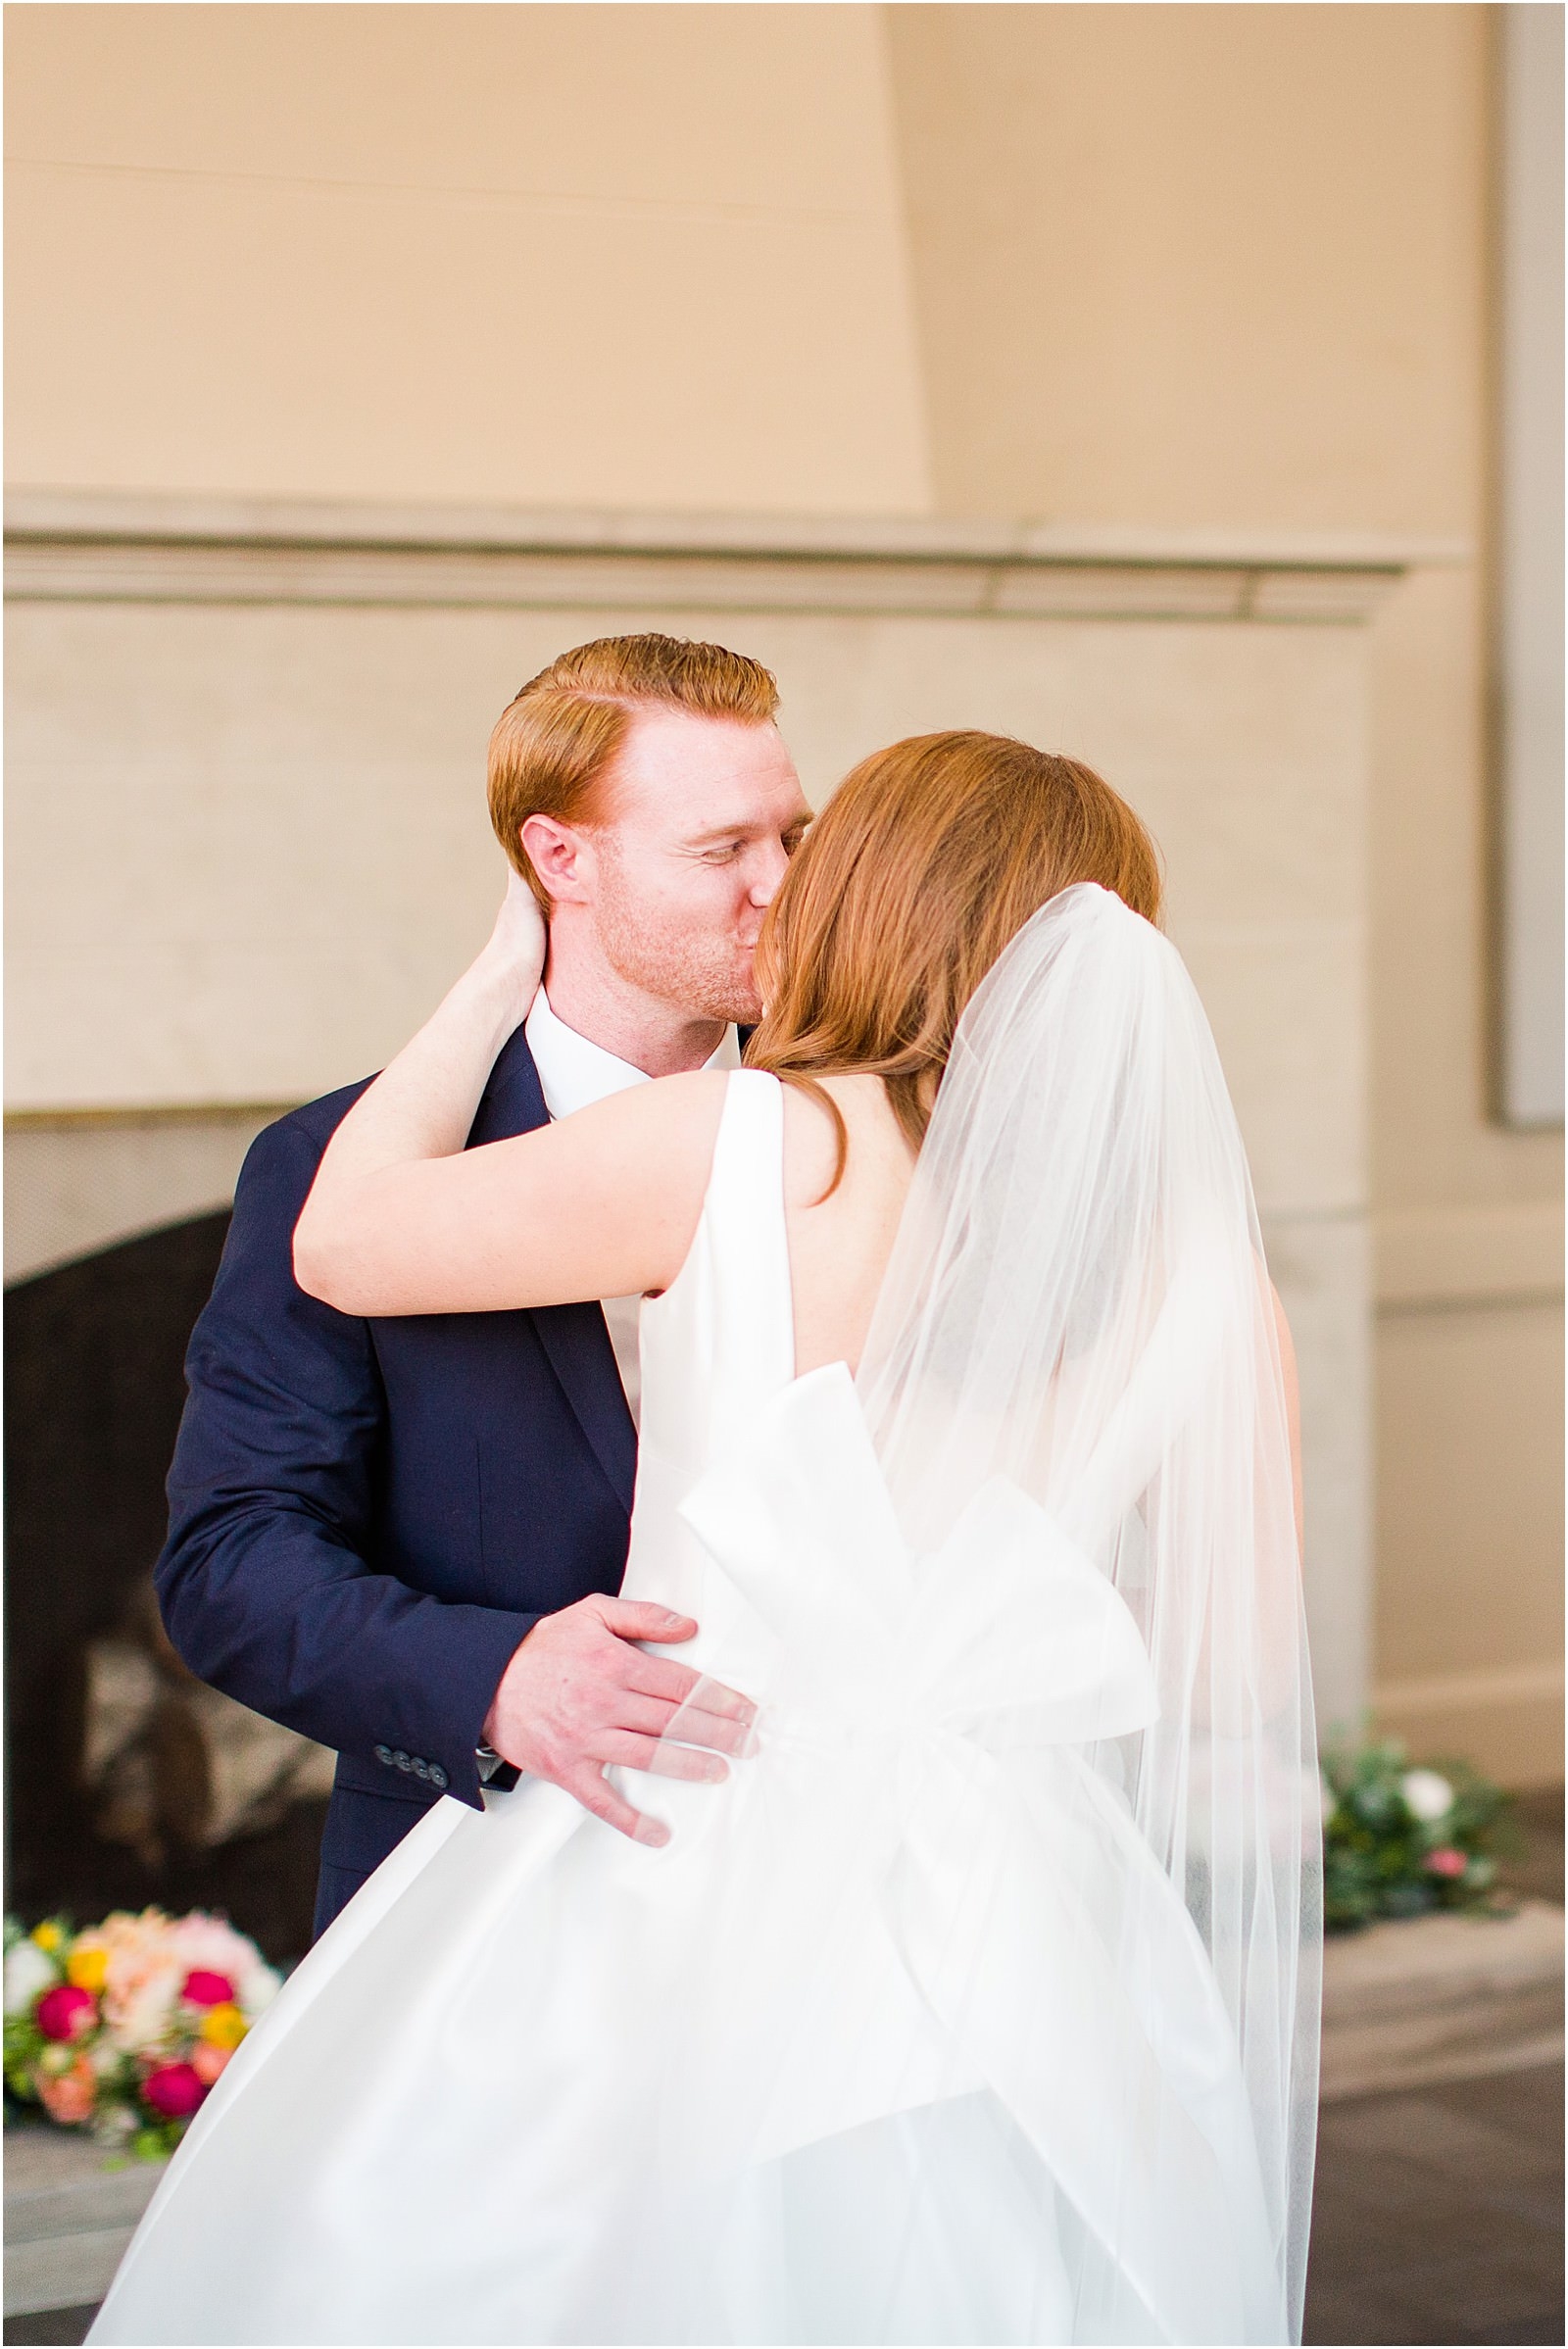 A Perfectly Intimate Wedding in Downtown Evansville Indiana | Jennah and Steve | Bret and Brandie Photography | | 0091.jpg